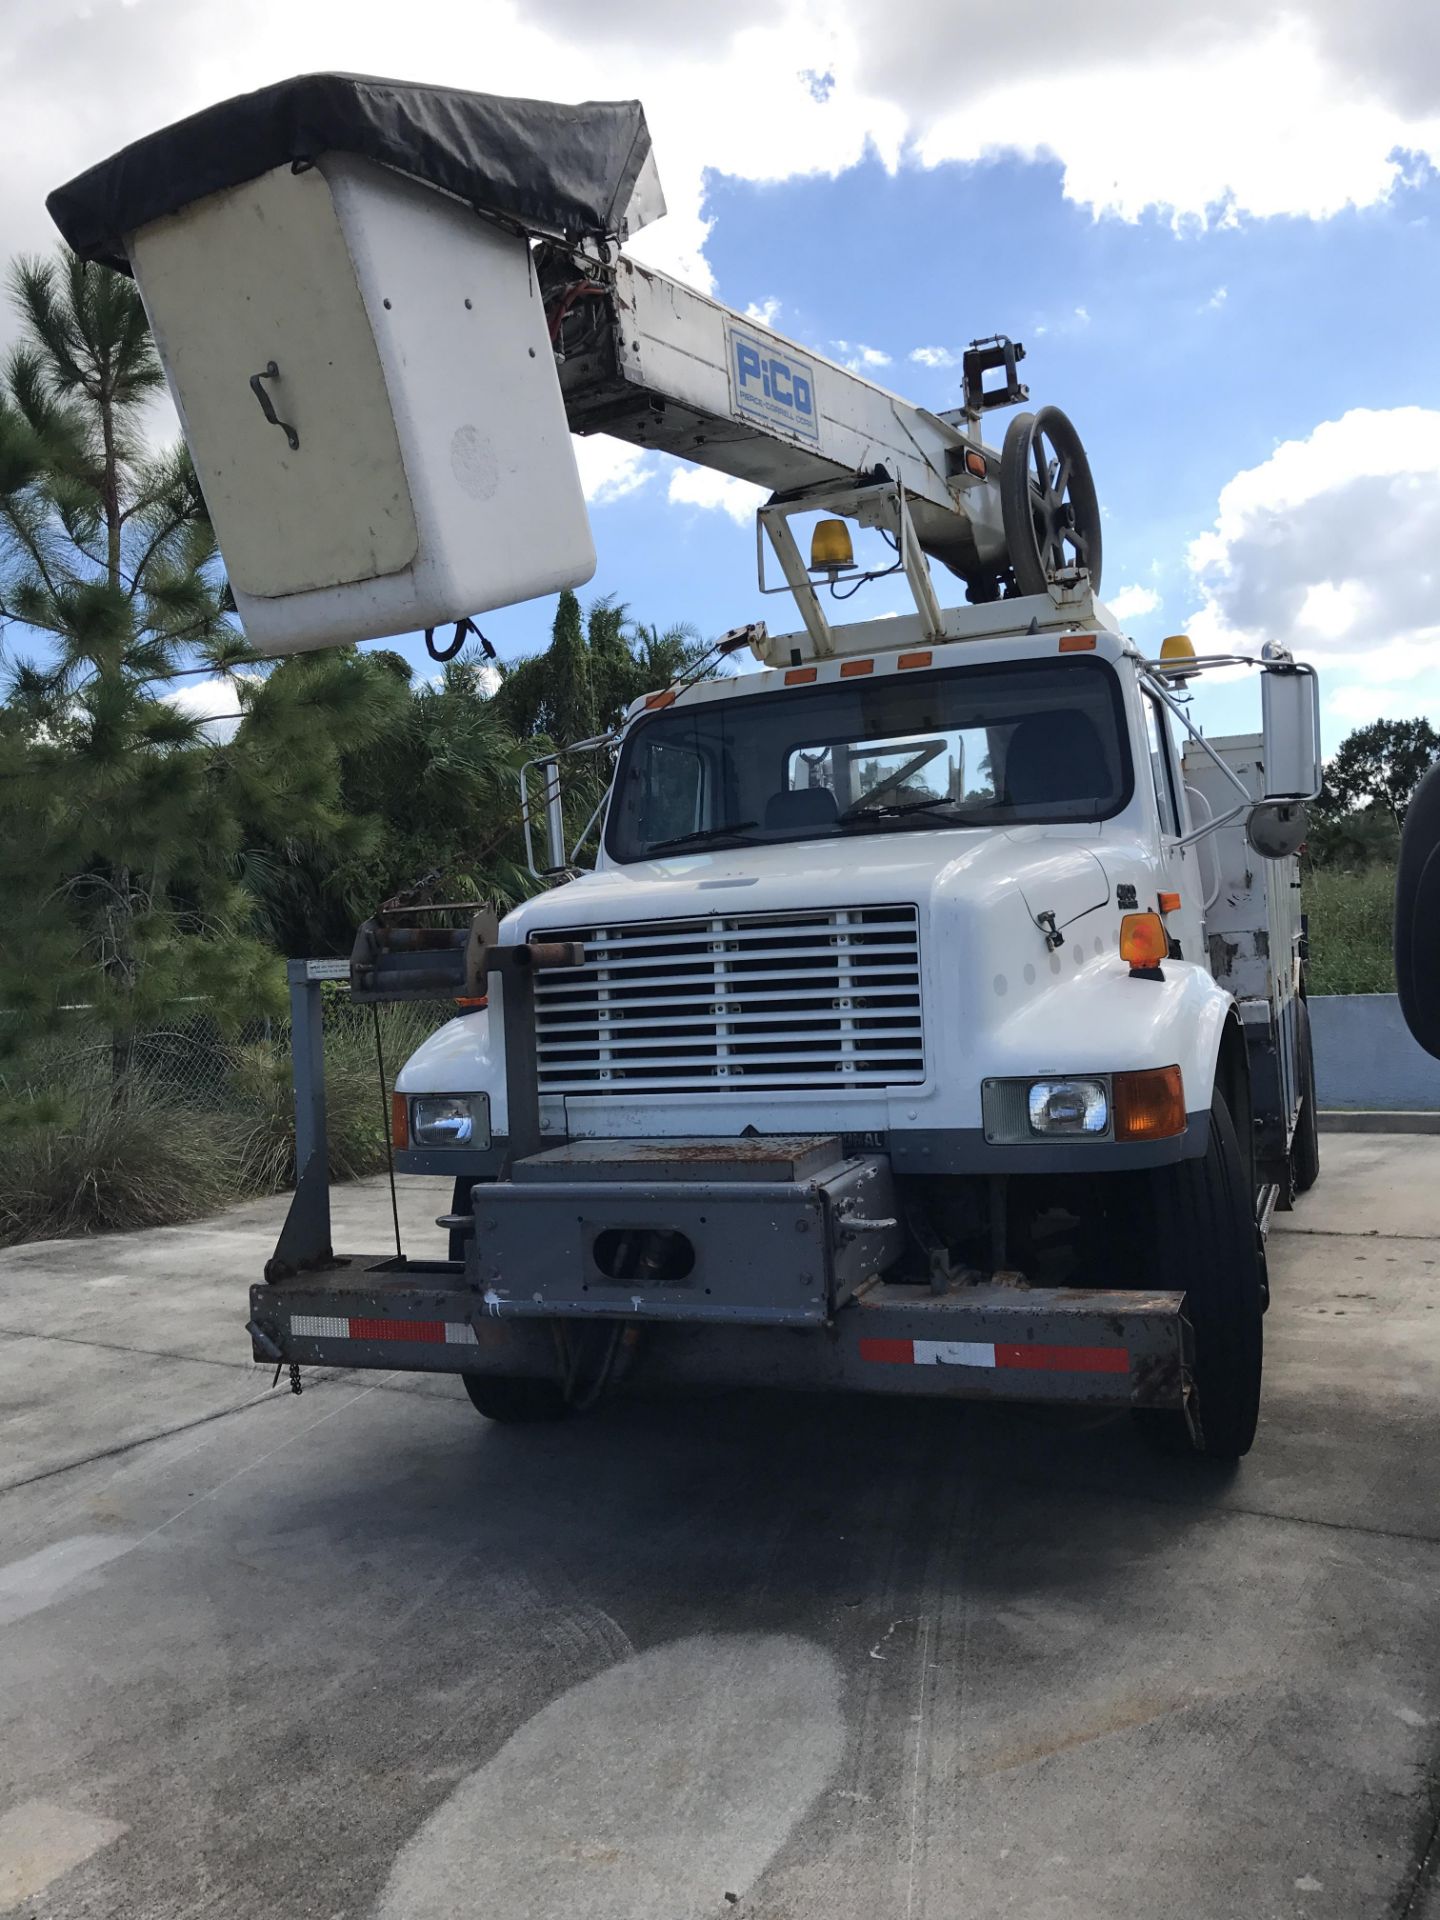 2002 INTERNATIONAL 4000 SERIES PICO CABLE PLACING BUCKET TRUCK - Image 2 of 4